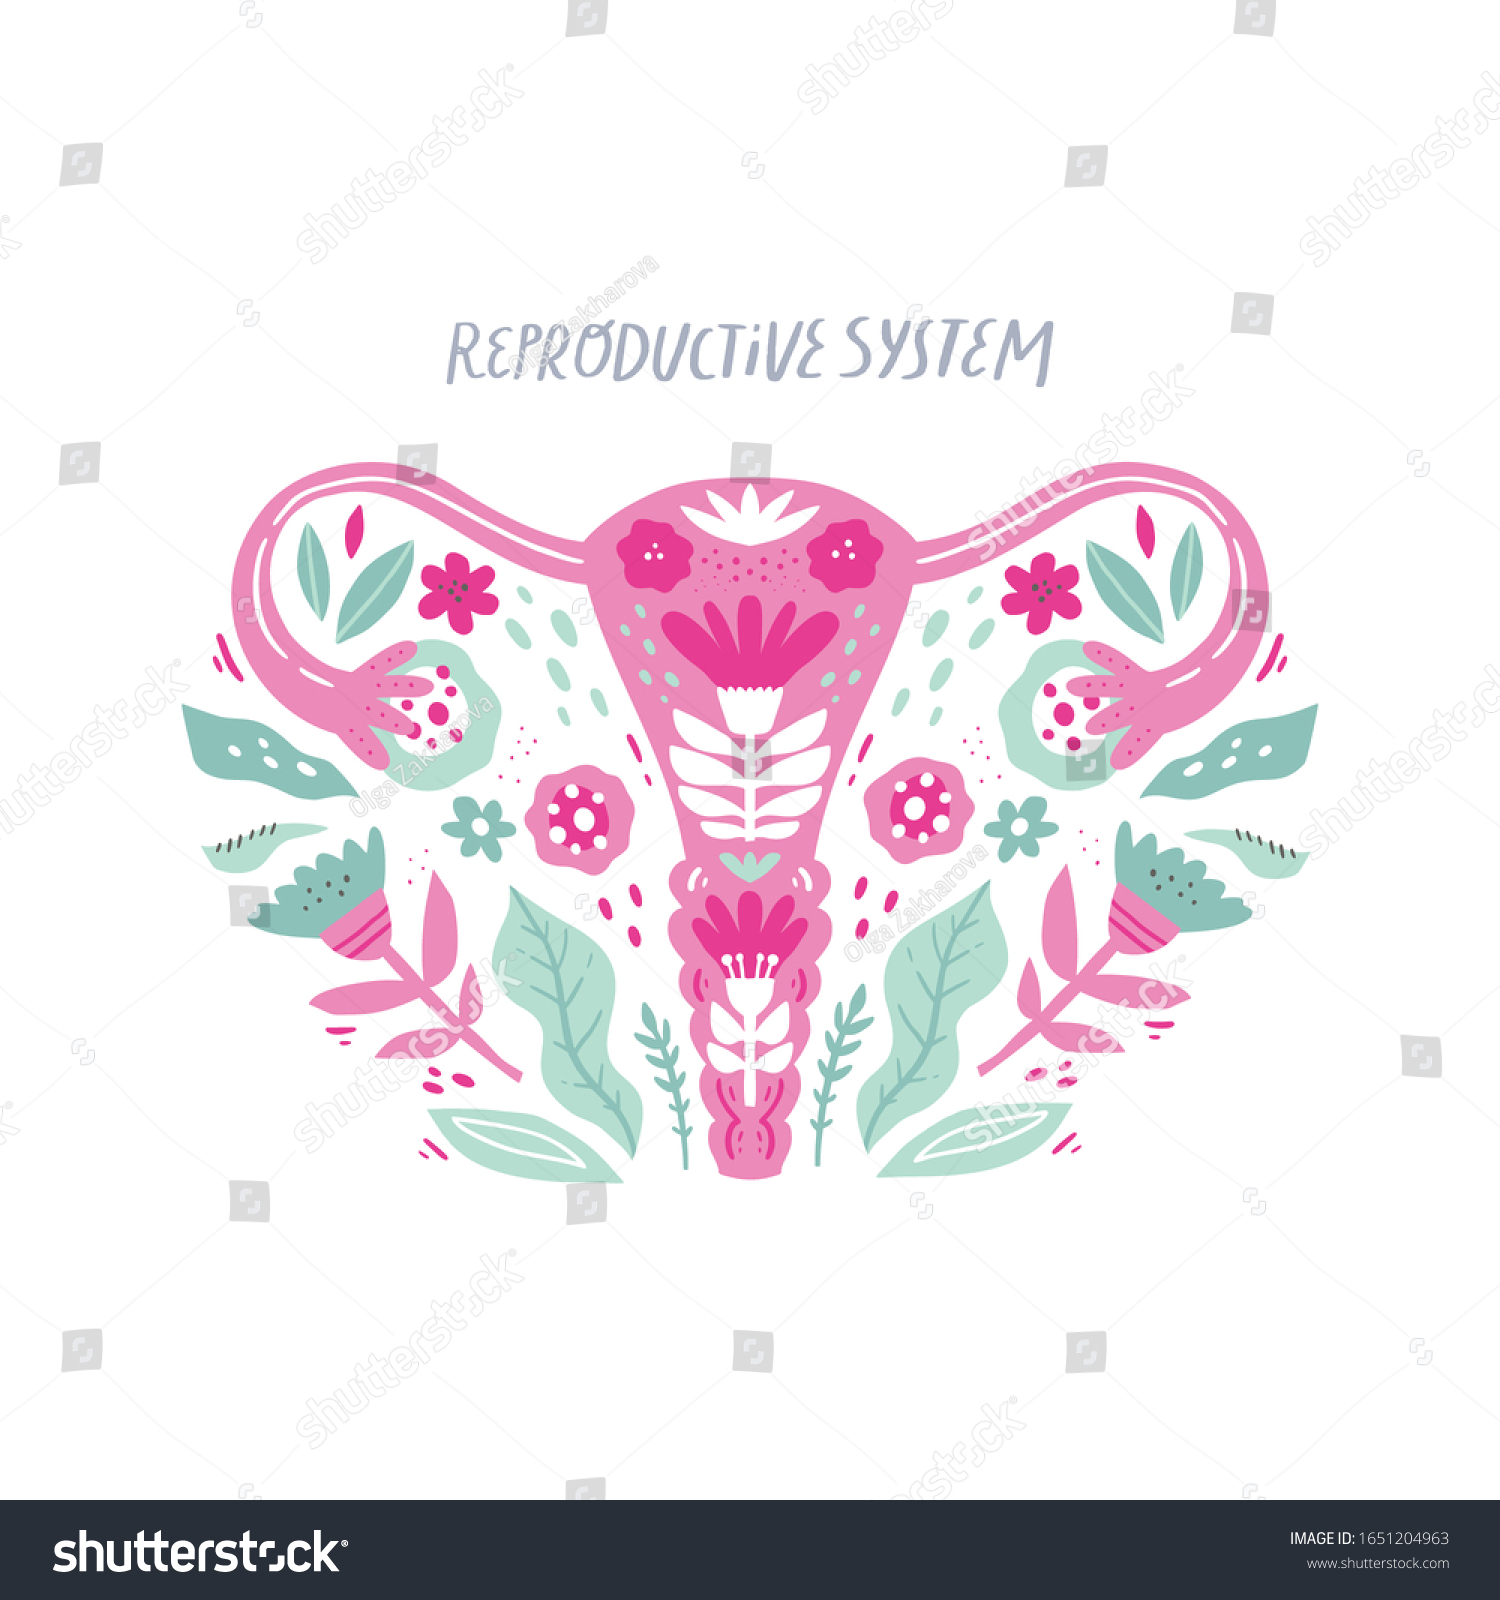 Woman Reproductive System Flat Vector Banner Stock Vector Royalty Free 1651204963 4648